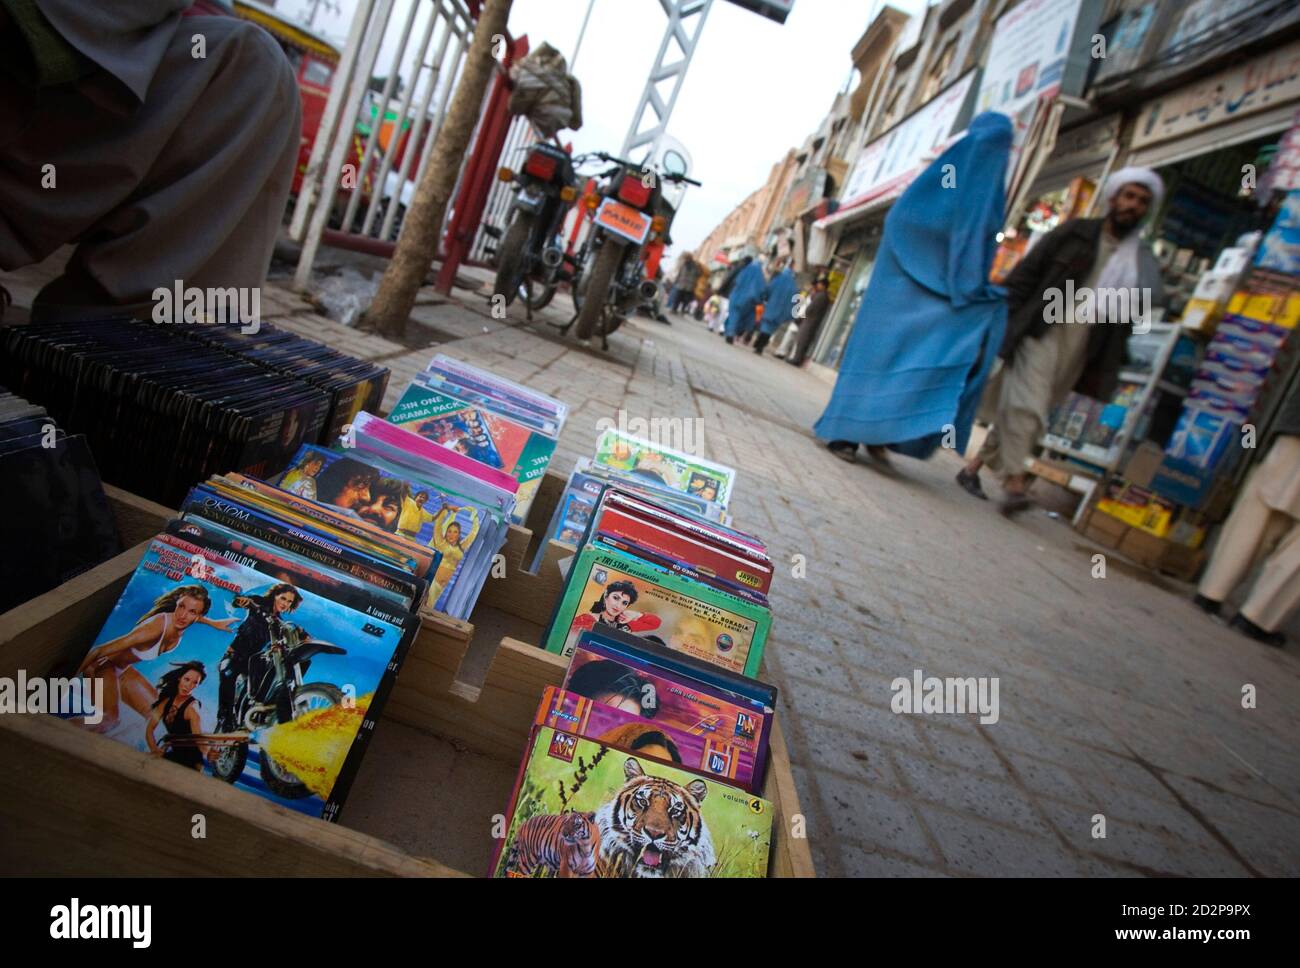 Dvds For Sale High Resolution Stock Photography and Images - Alamy